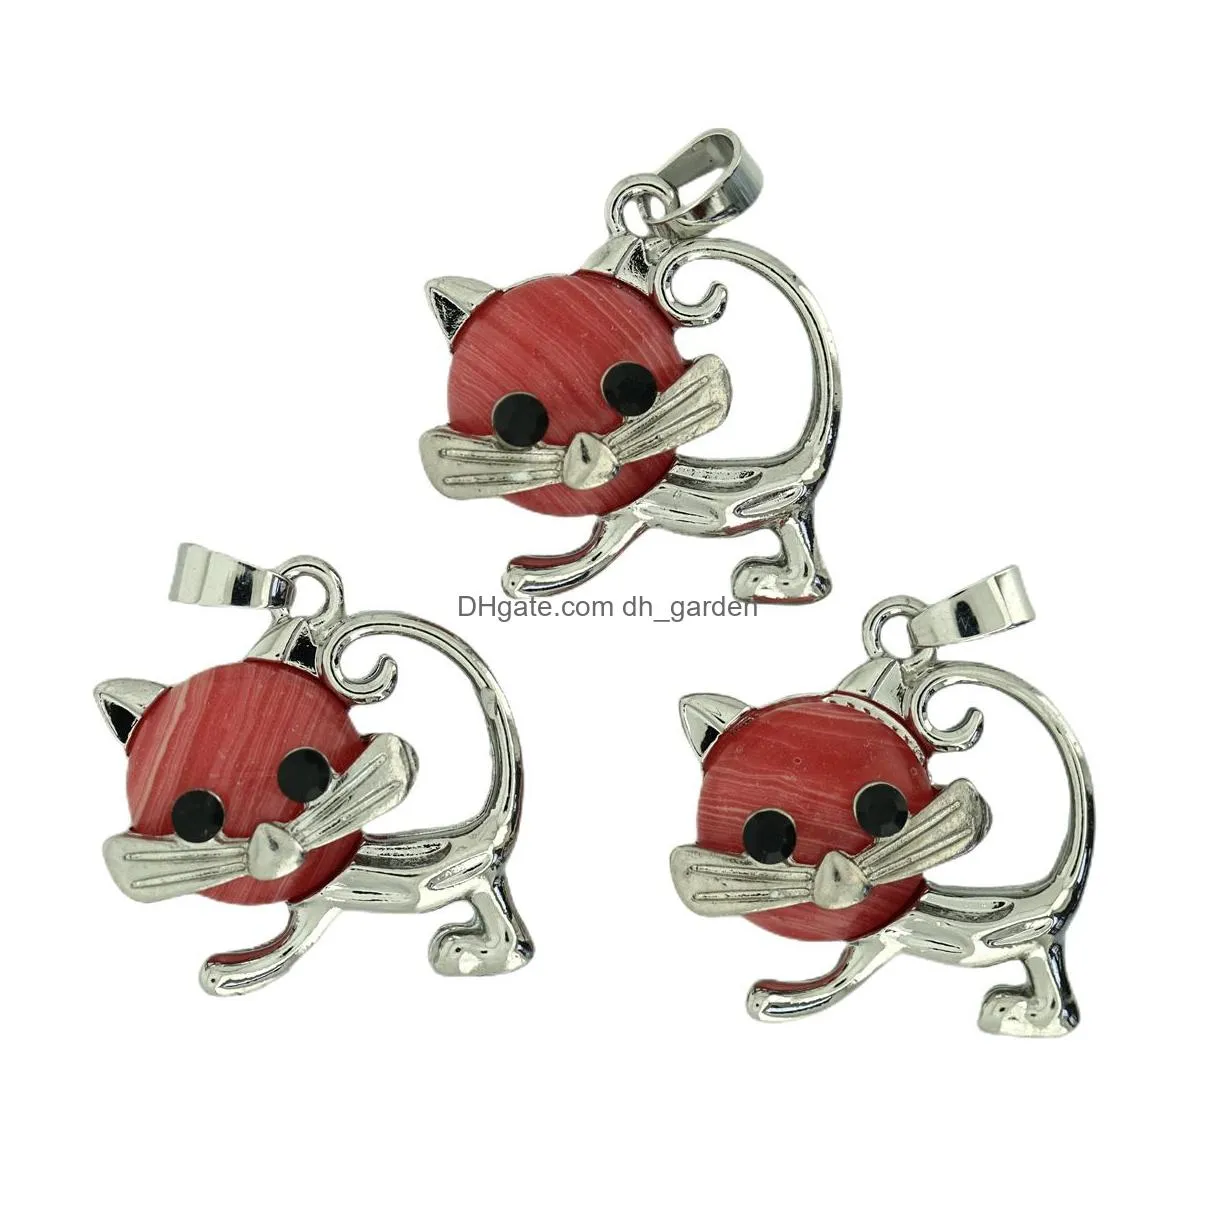 2023 new selling gemstone sliver cat pendant with stainless steel cat pendant for jewelry making necklace